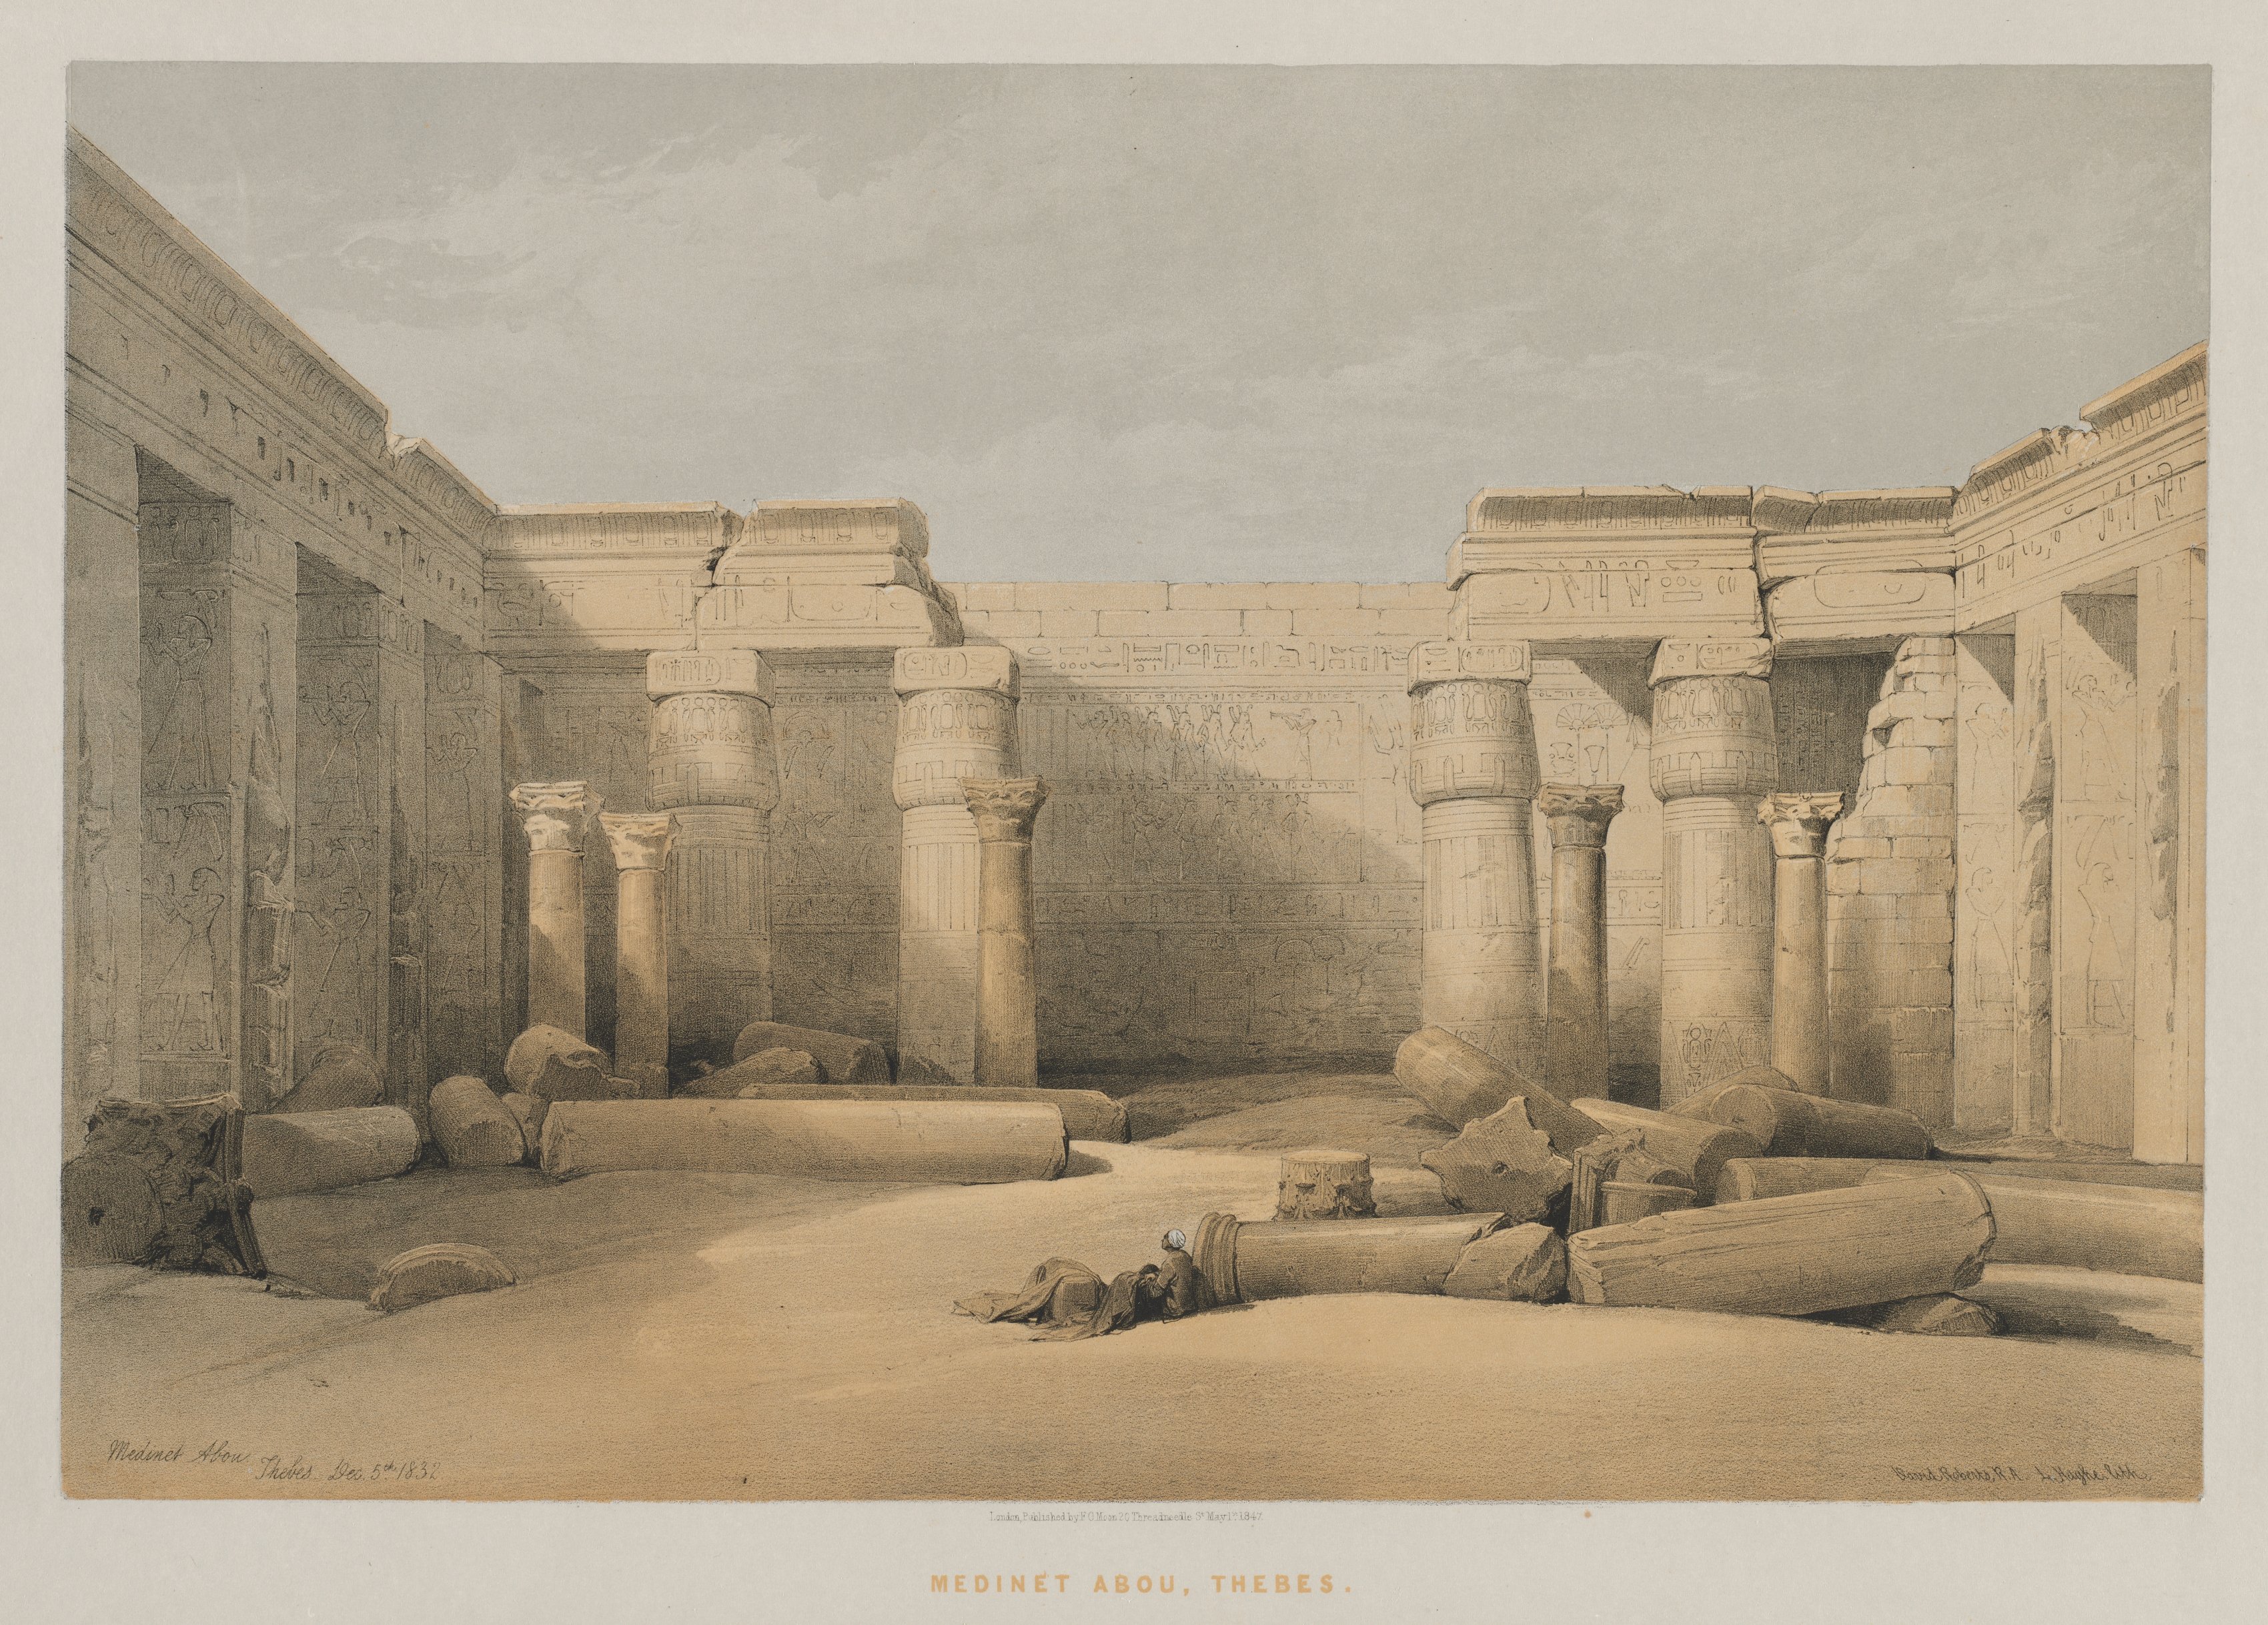 Egypt and Nubia, Volume II: Medinet Abou, Thebes